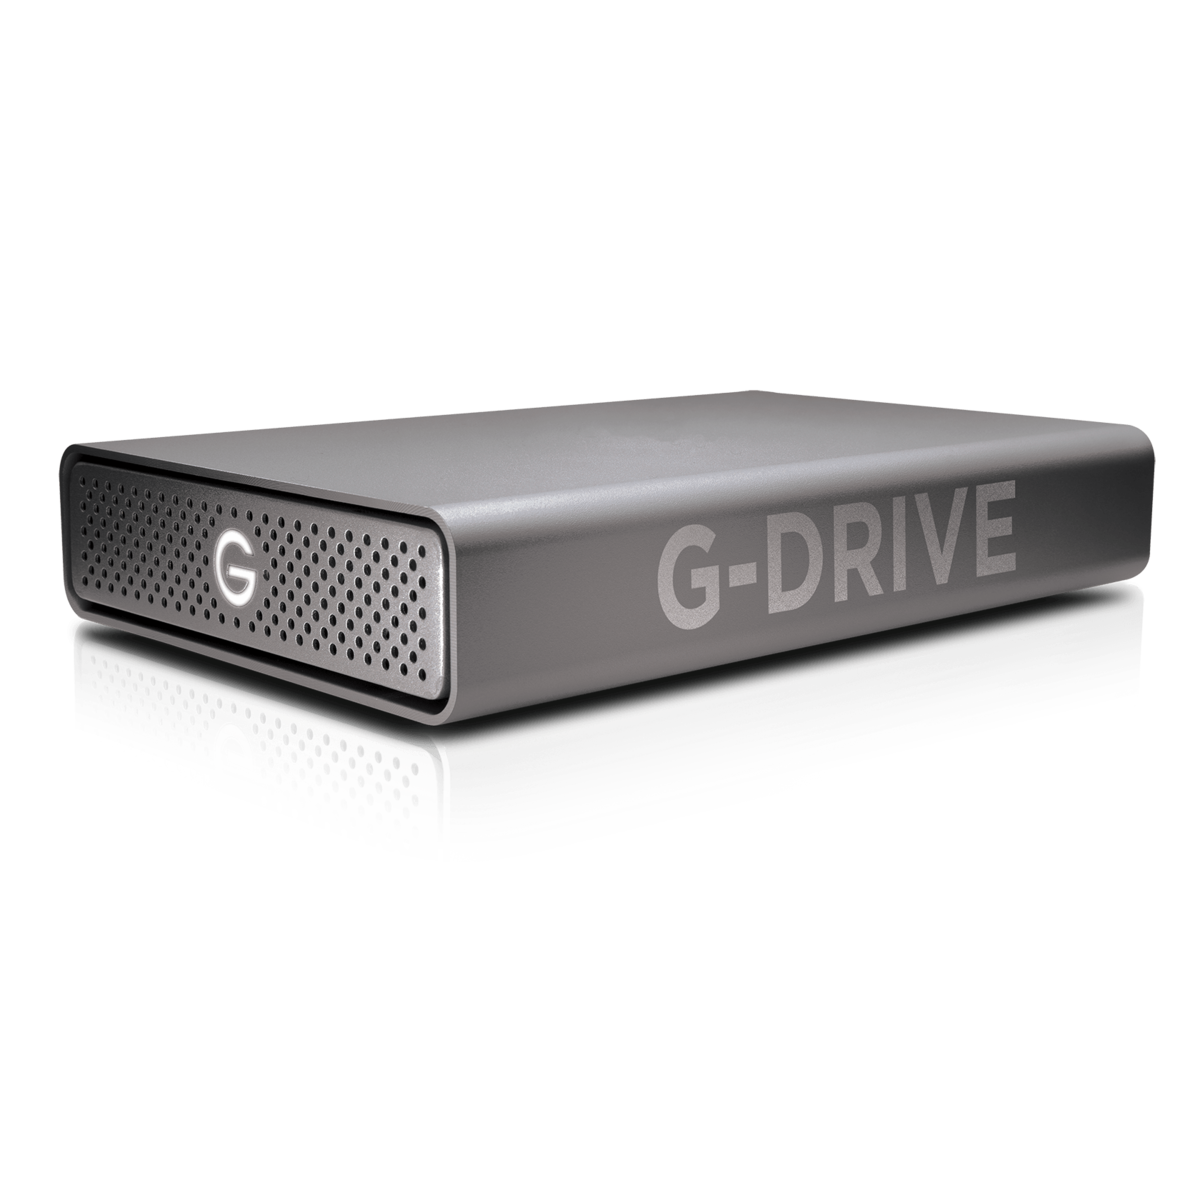 SanDisk Professional G-DRIVE Space Grey 18TB